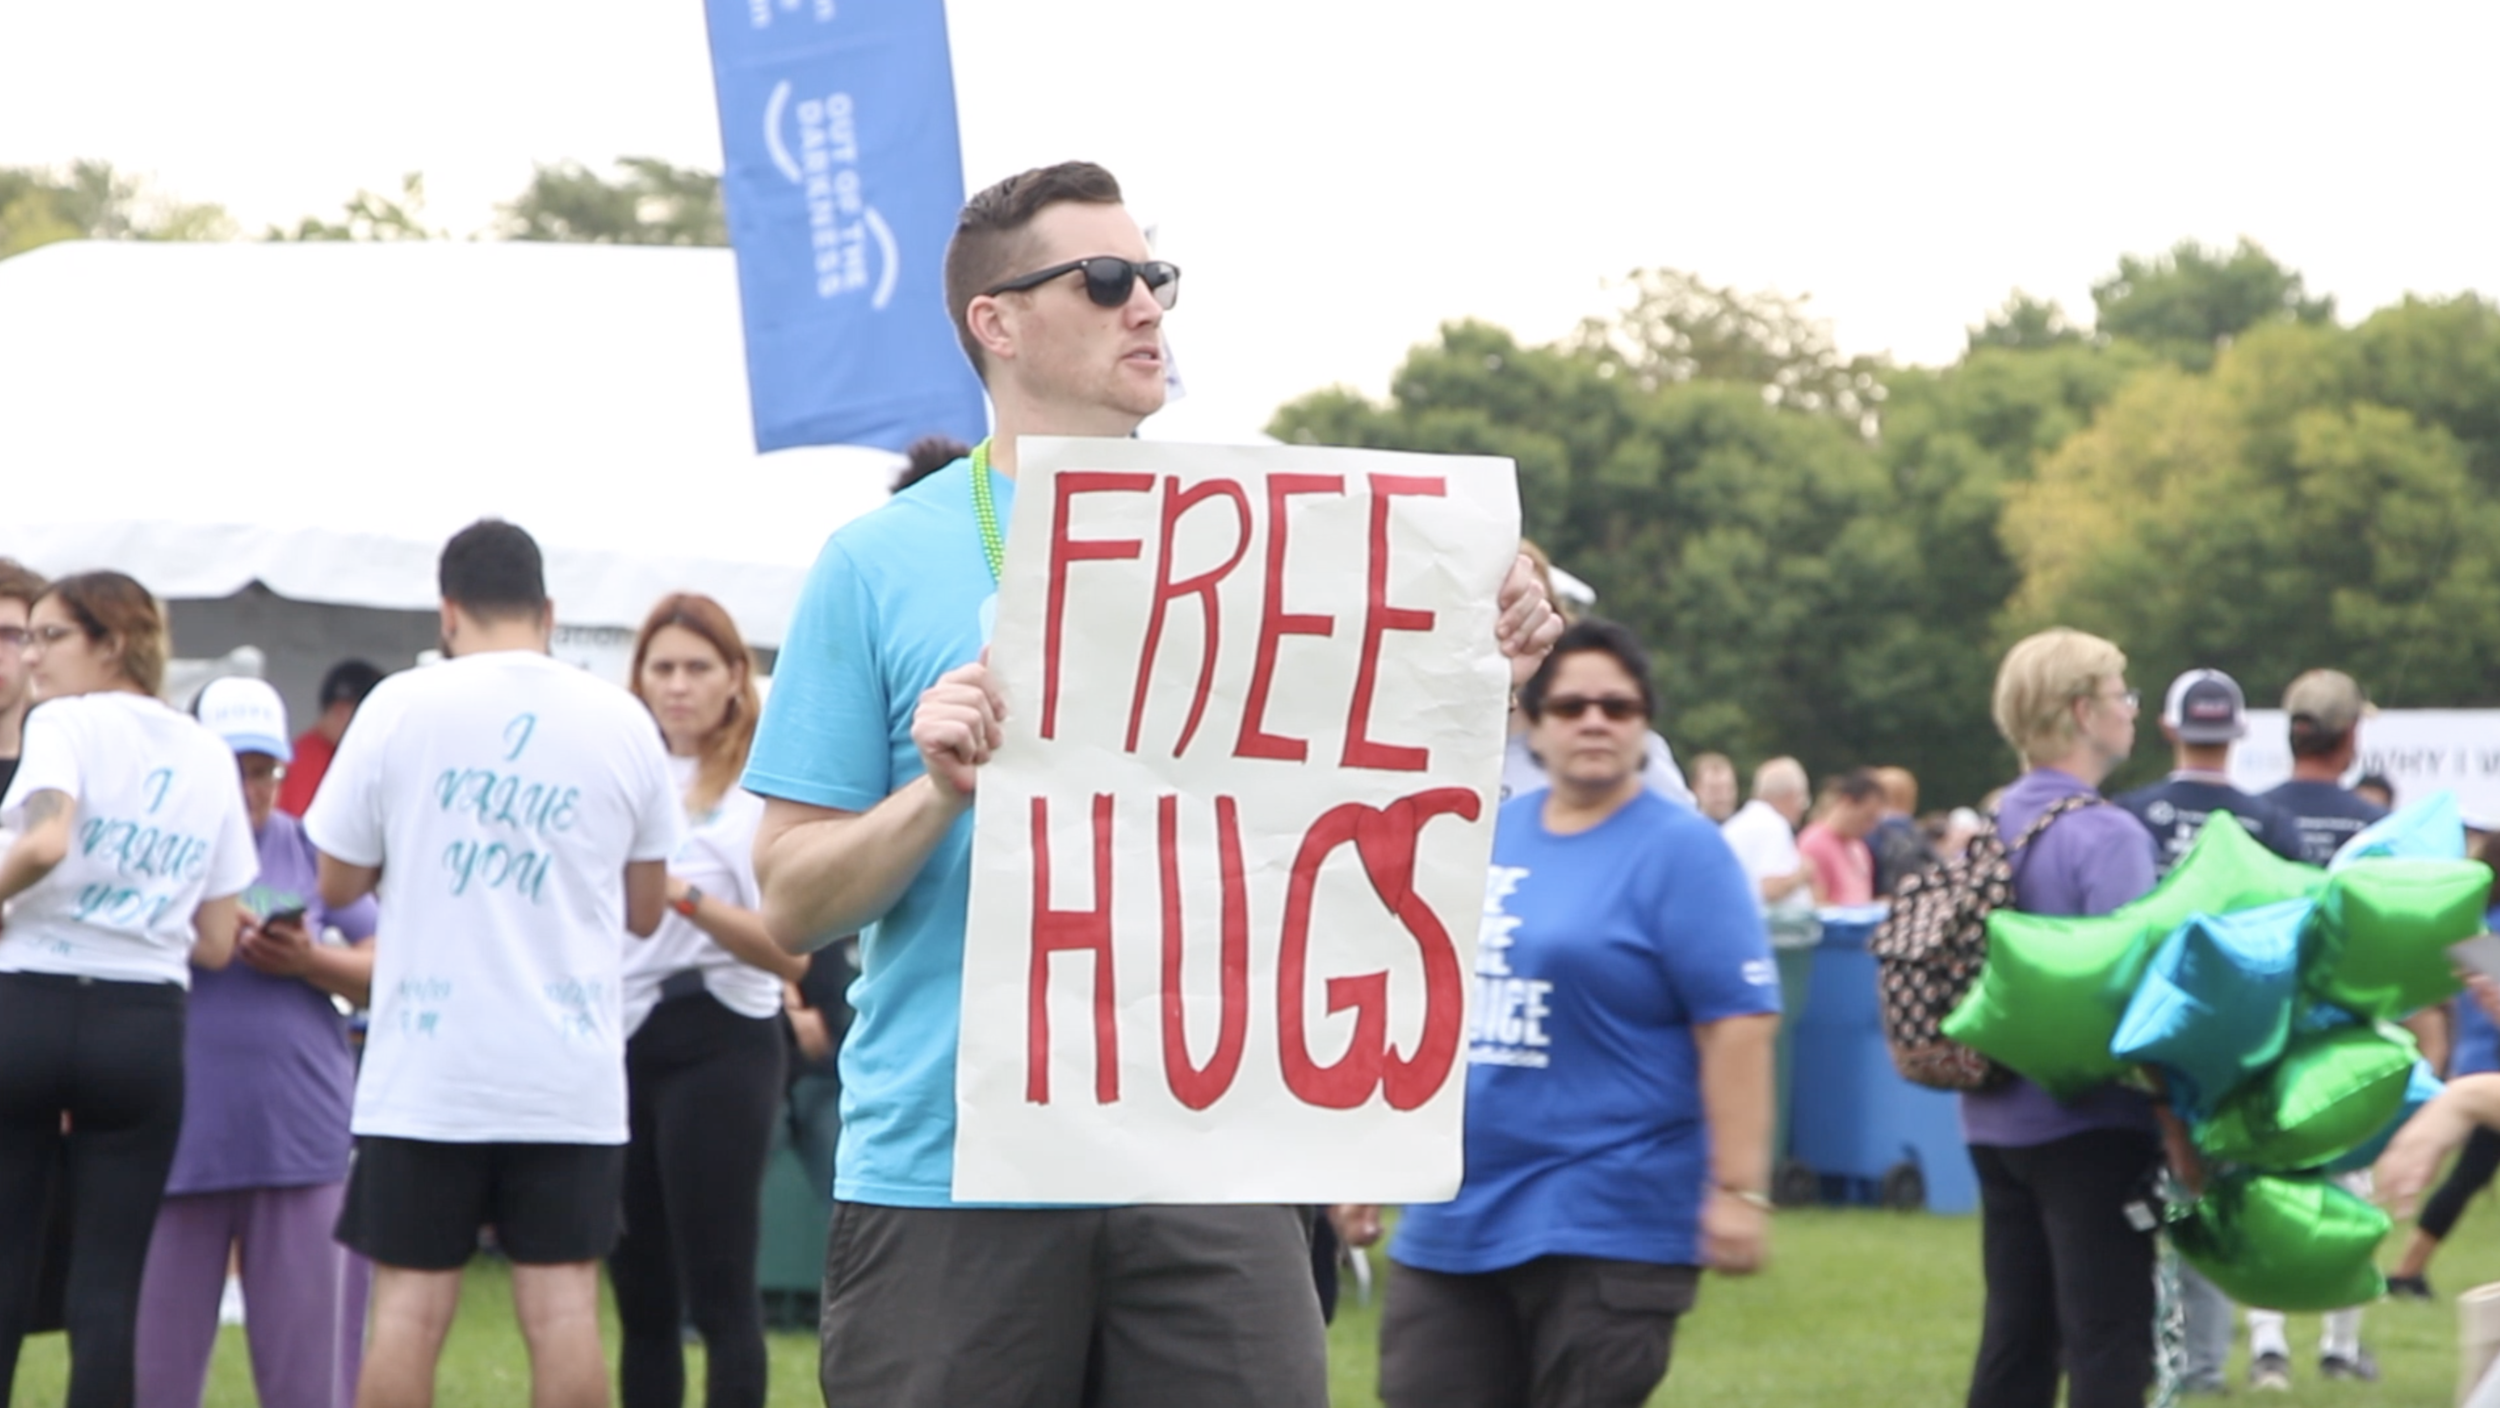 A volunteer offering free hugs at the event.